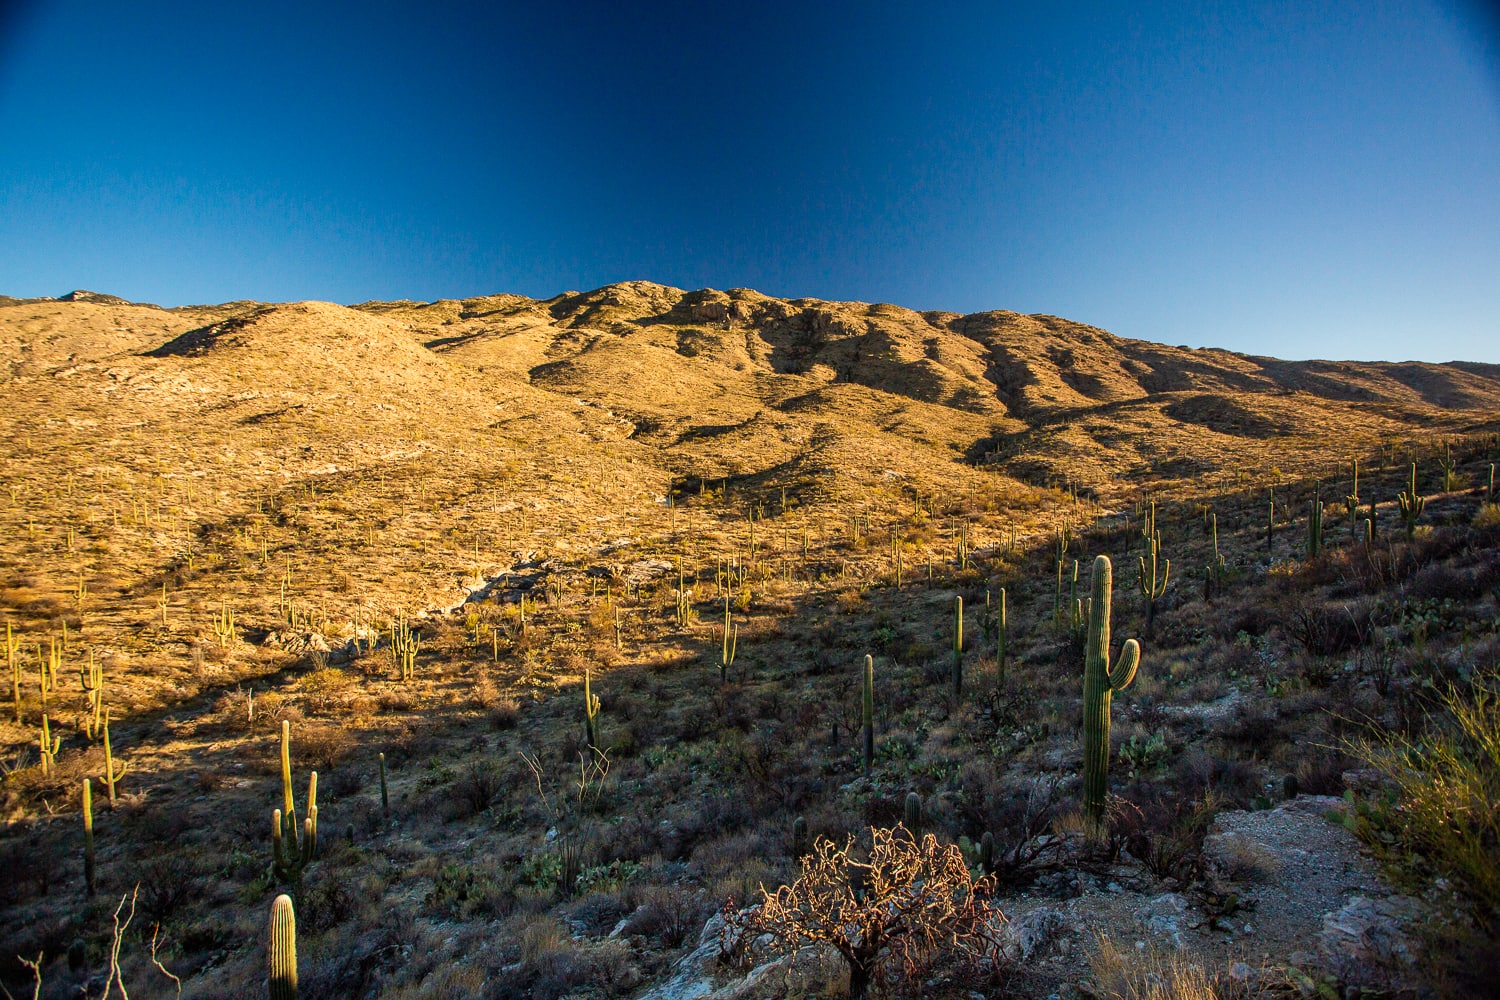 Saguaro cactuses dot the valley in the desert